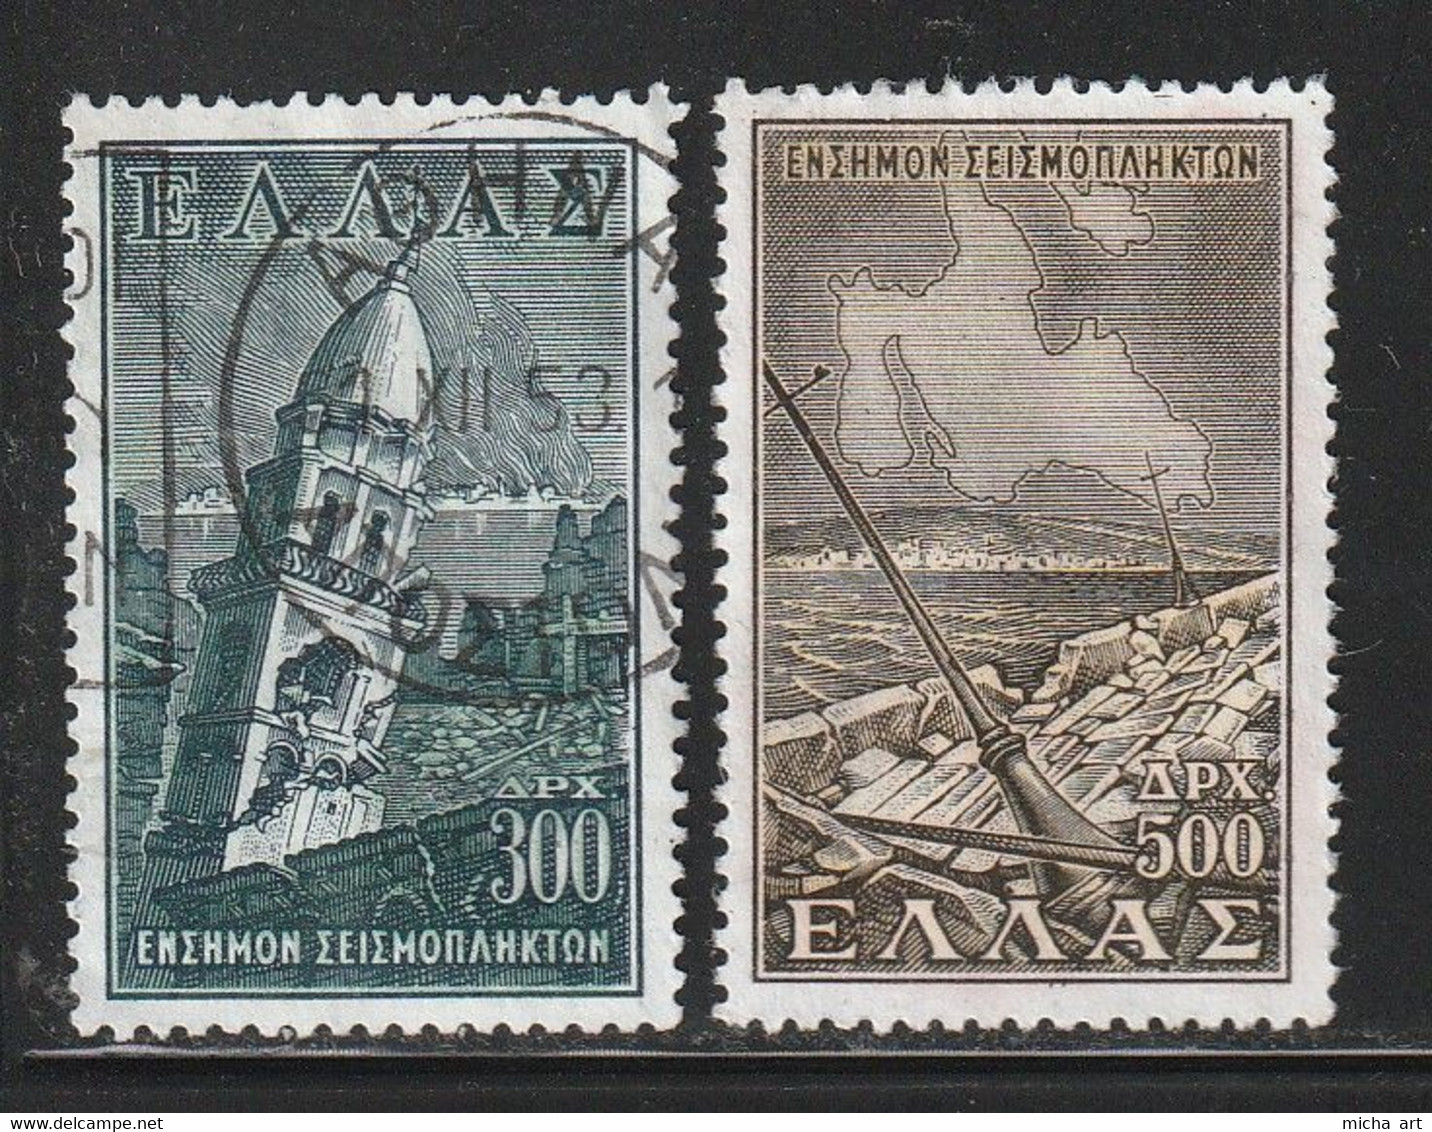 Greece 1953 Ionian Islands Earthquake Fund - Charity Issue Set Used W0891 - Beneficenza